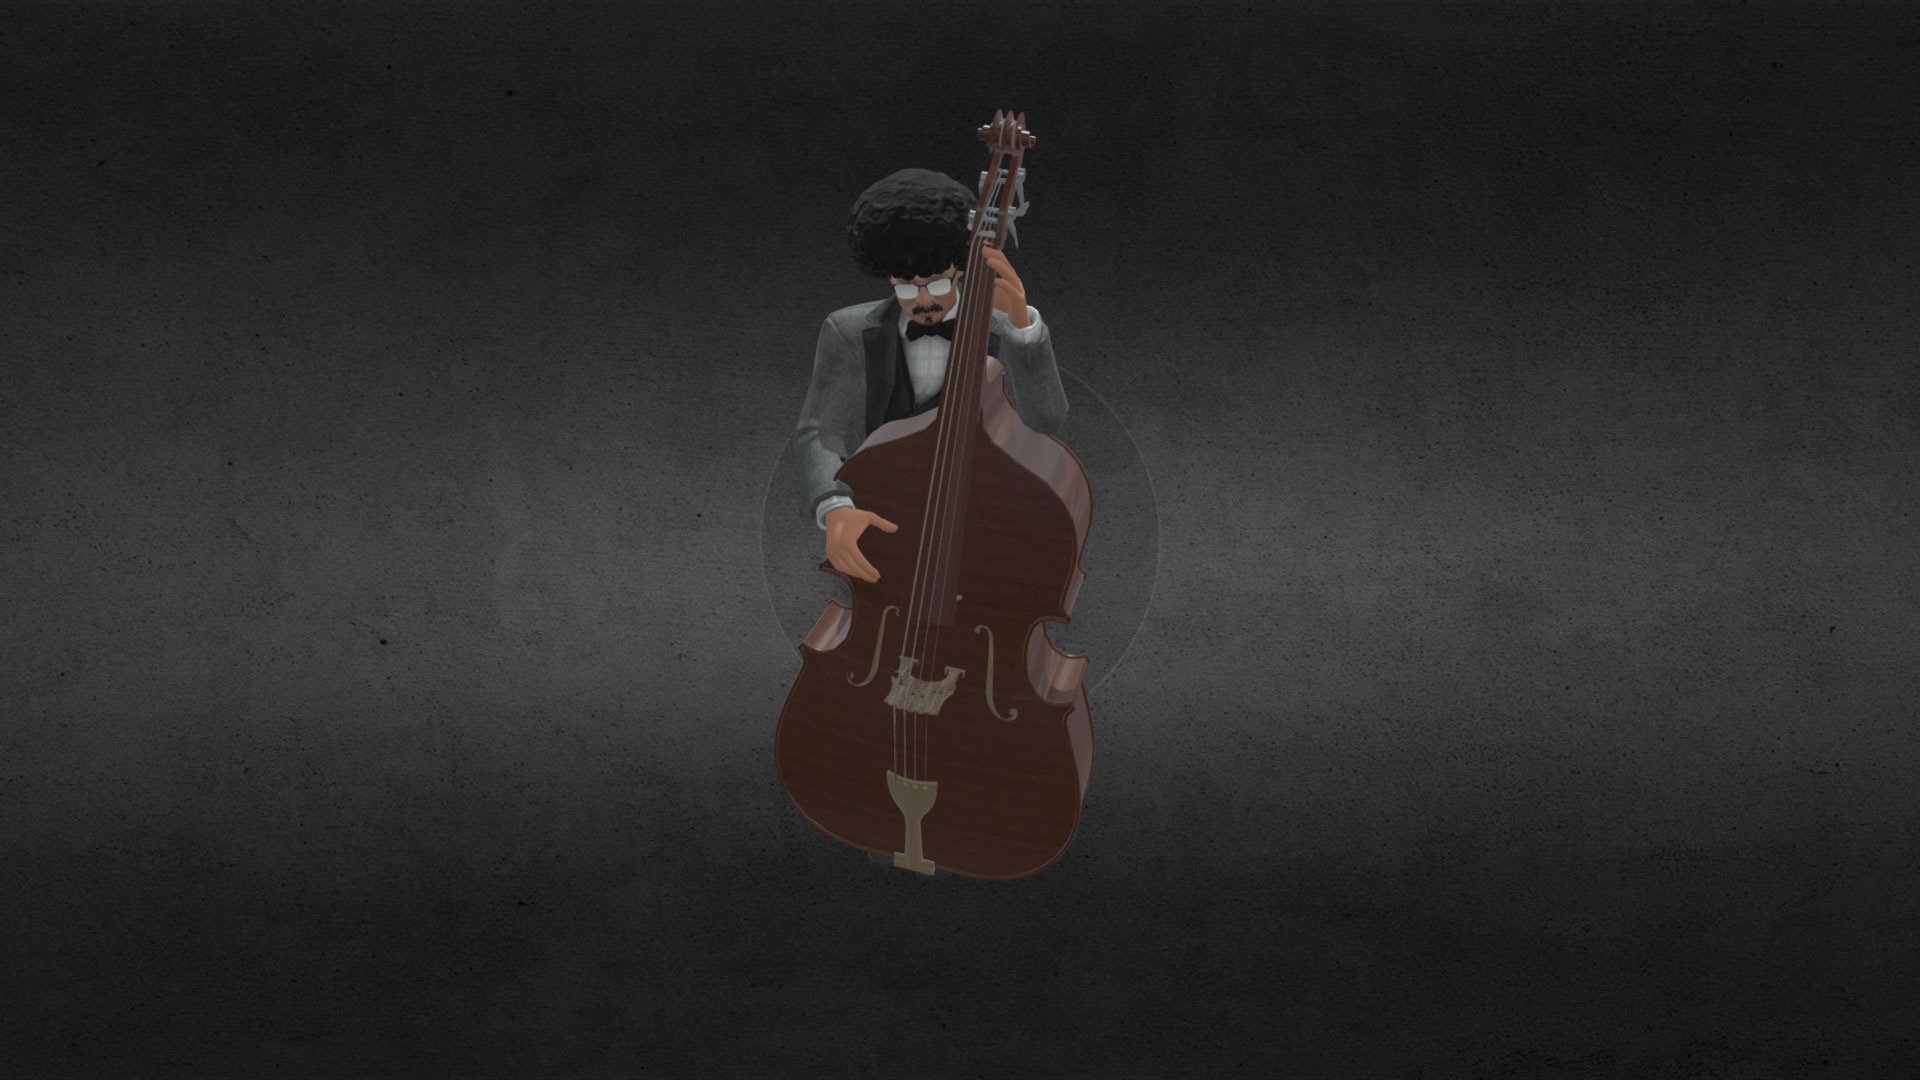 Double Bass: Bassist With Upright Bass, 3D Modeling, Computer Graphics. 1920x1080 Full HD Wallpaper.